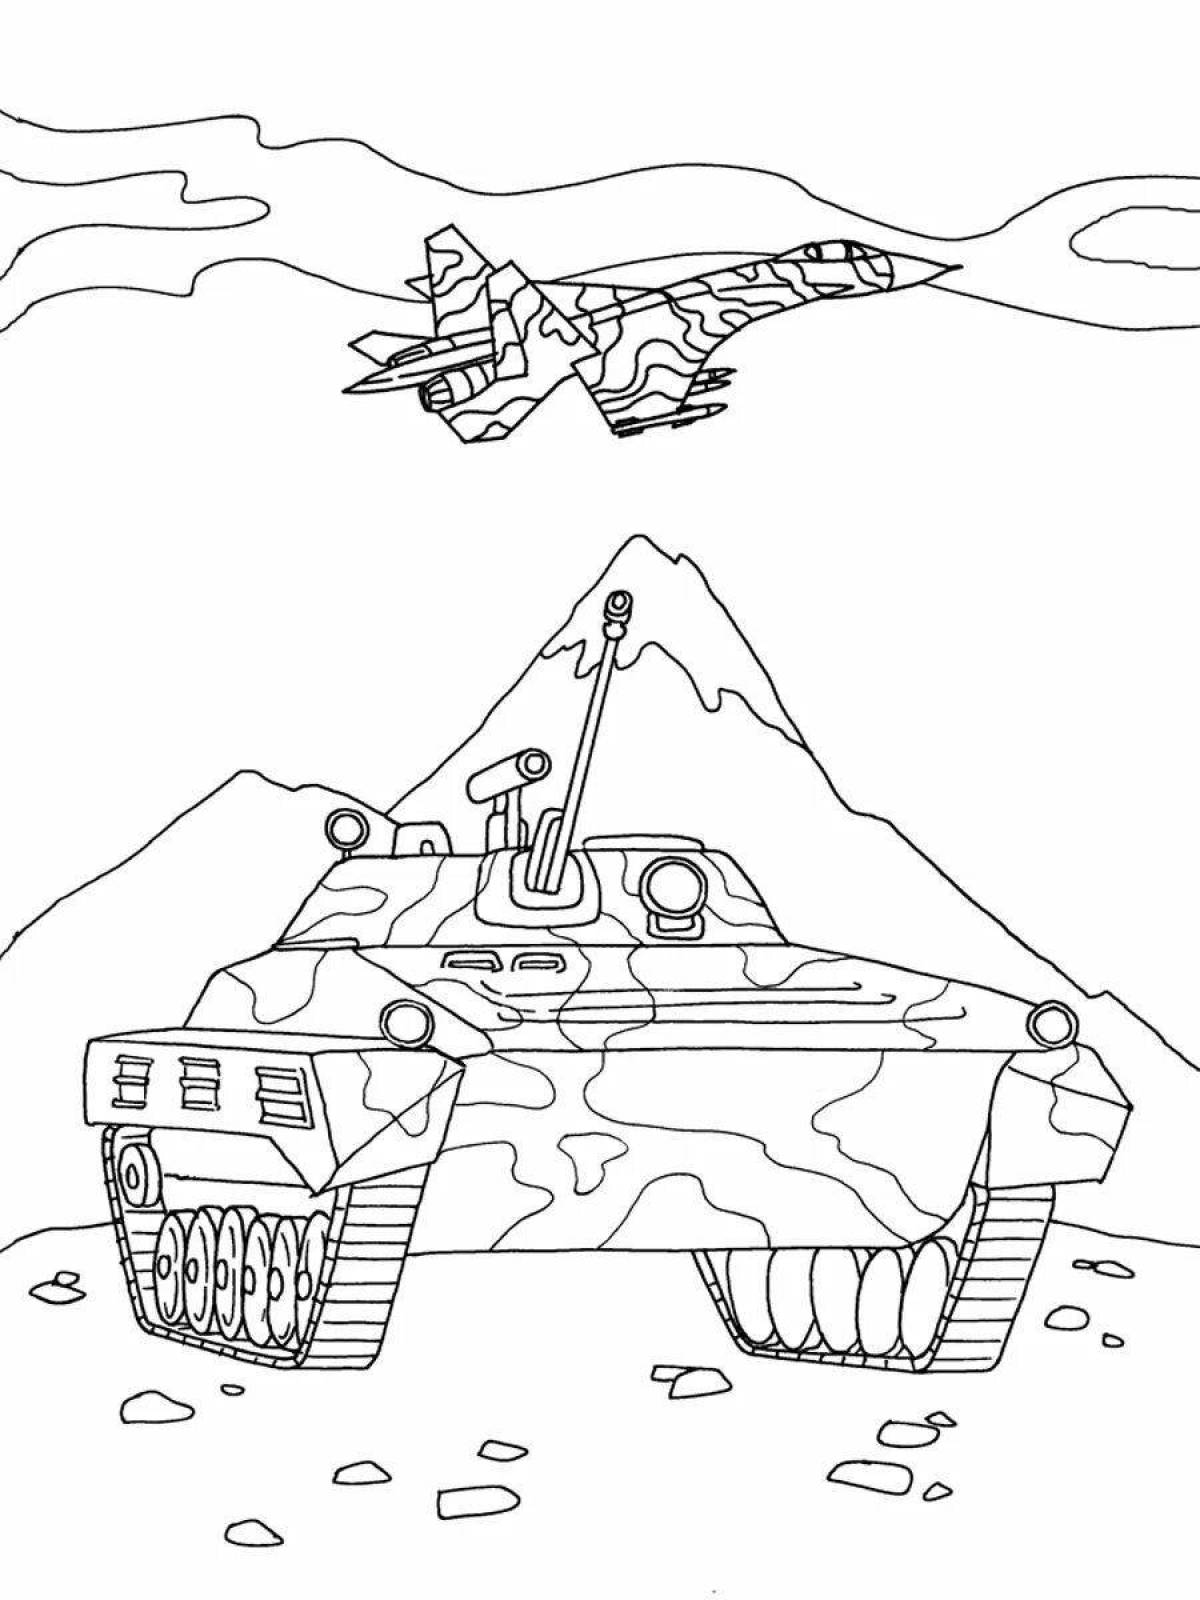 Adorable Tank Coloring Book for Toddlers